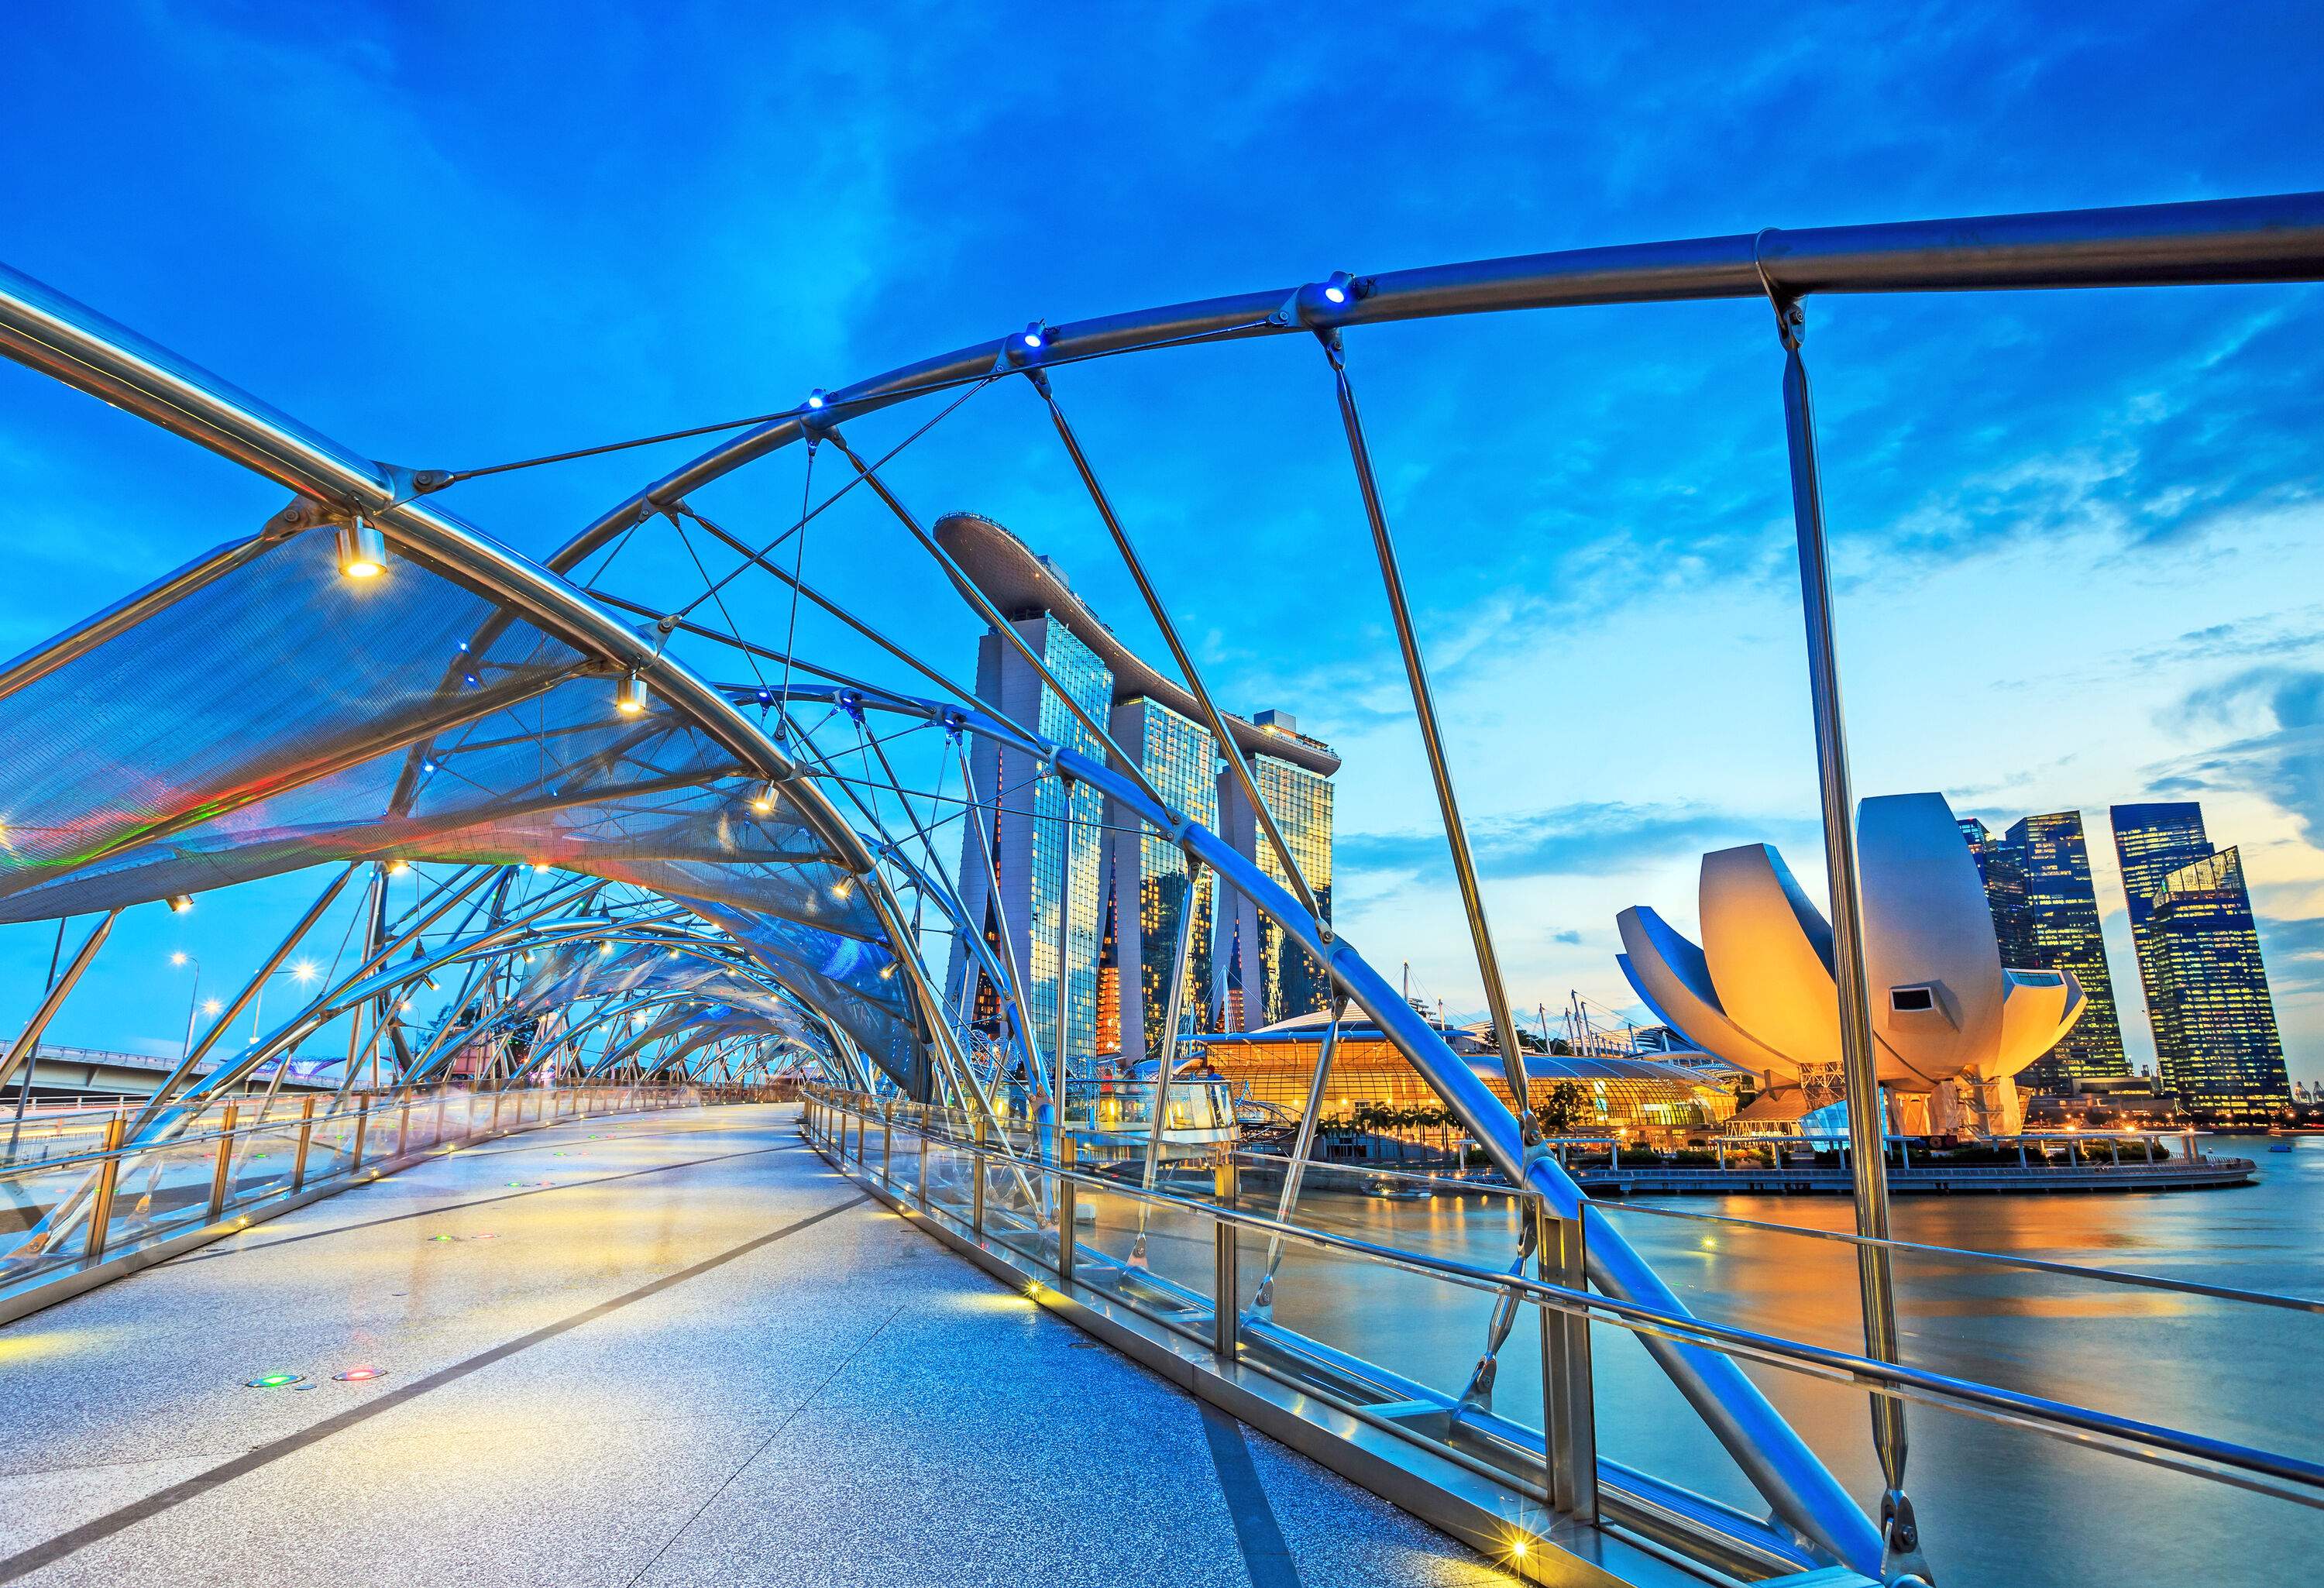 The Helix Bridge, an architectural marvel inspired by the shape of a DNA strand, elegantly spans across the river.